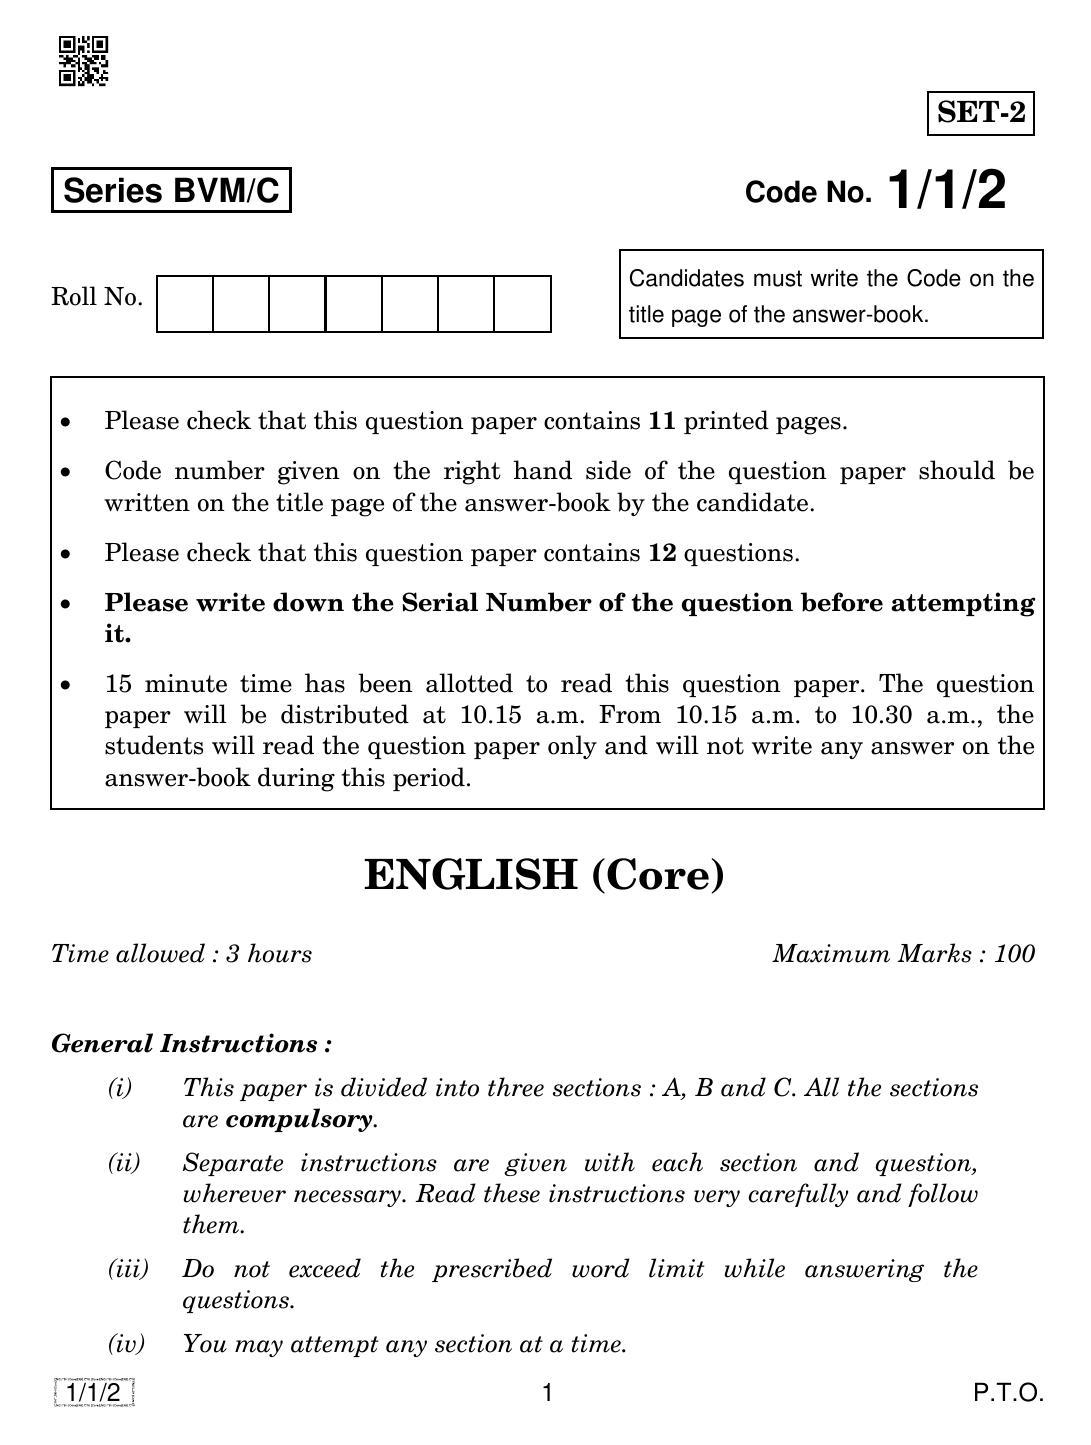 CBSE Class 12 1-1-2 ENGLISH CORE 2019 Compartment Question Paper - Page 1